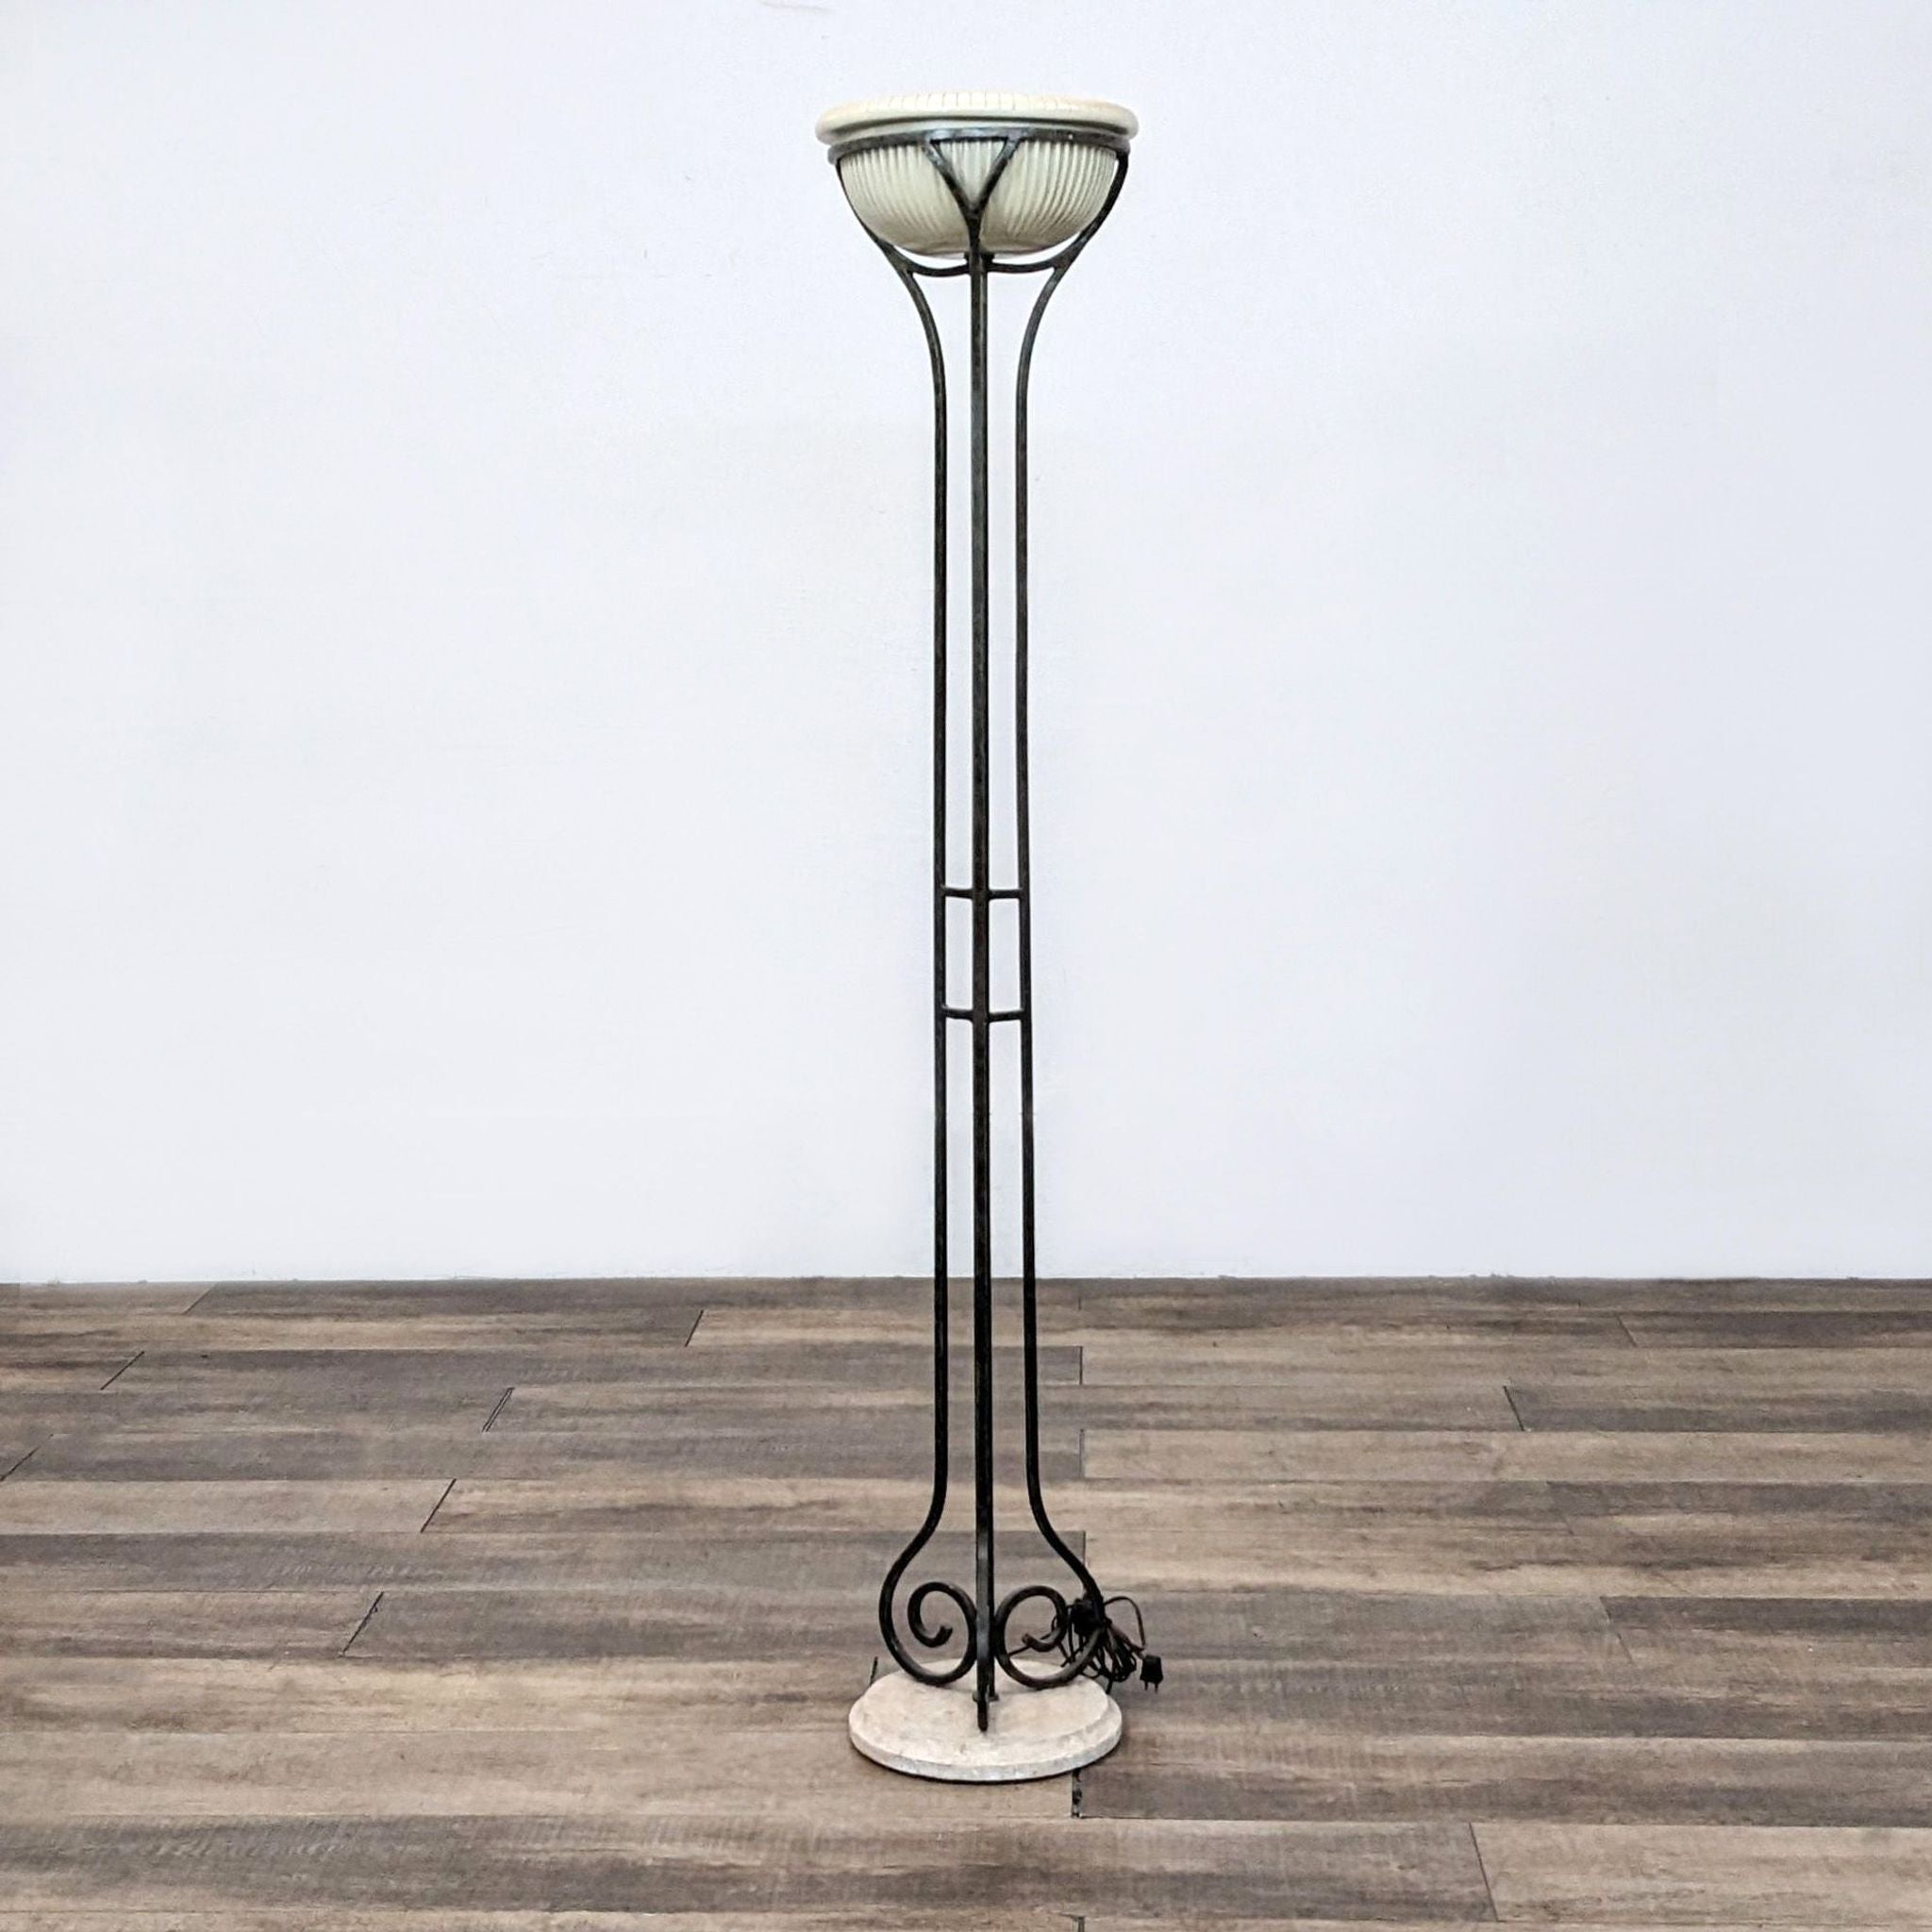 Alt text 1: Reperch brand floor lamp with intricate metalwork and frosted glass shade on a wooden floor.